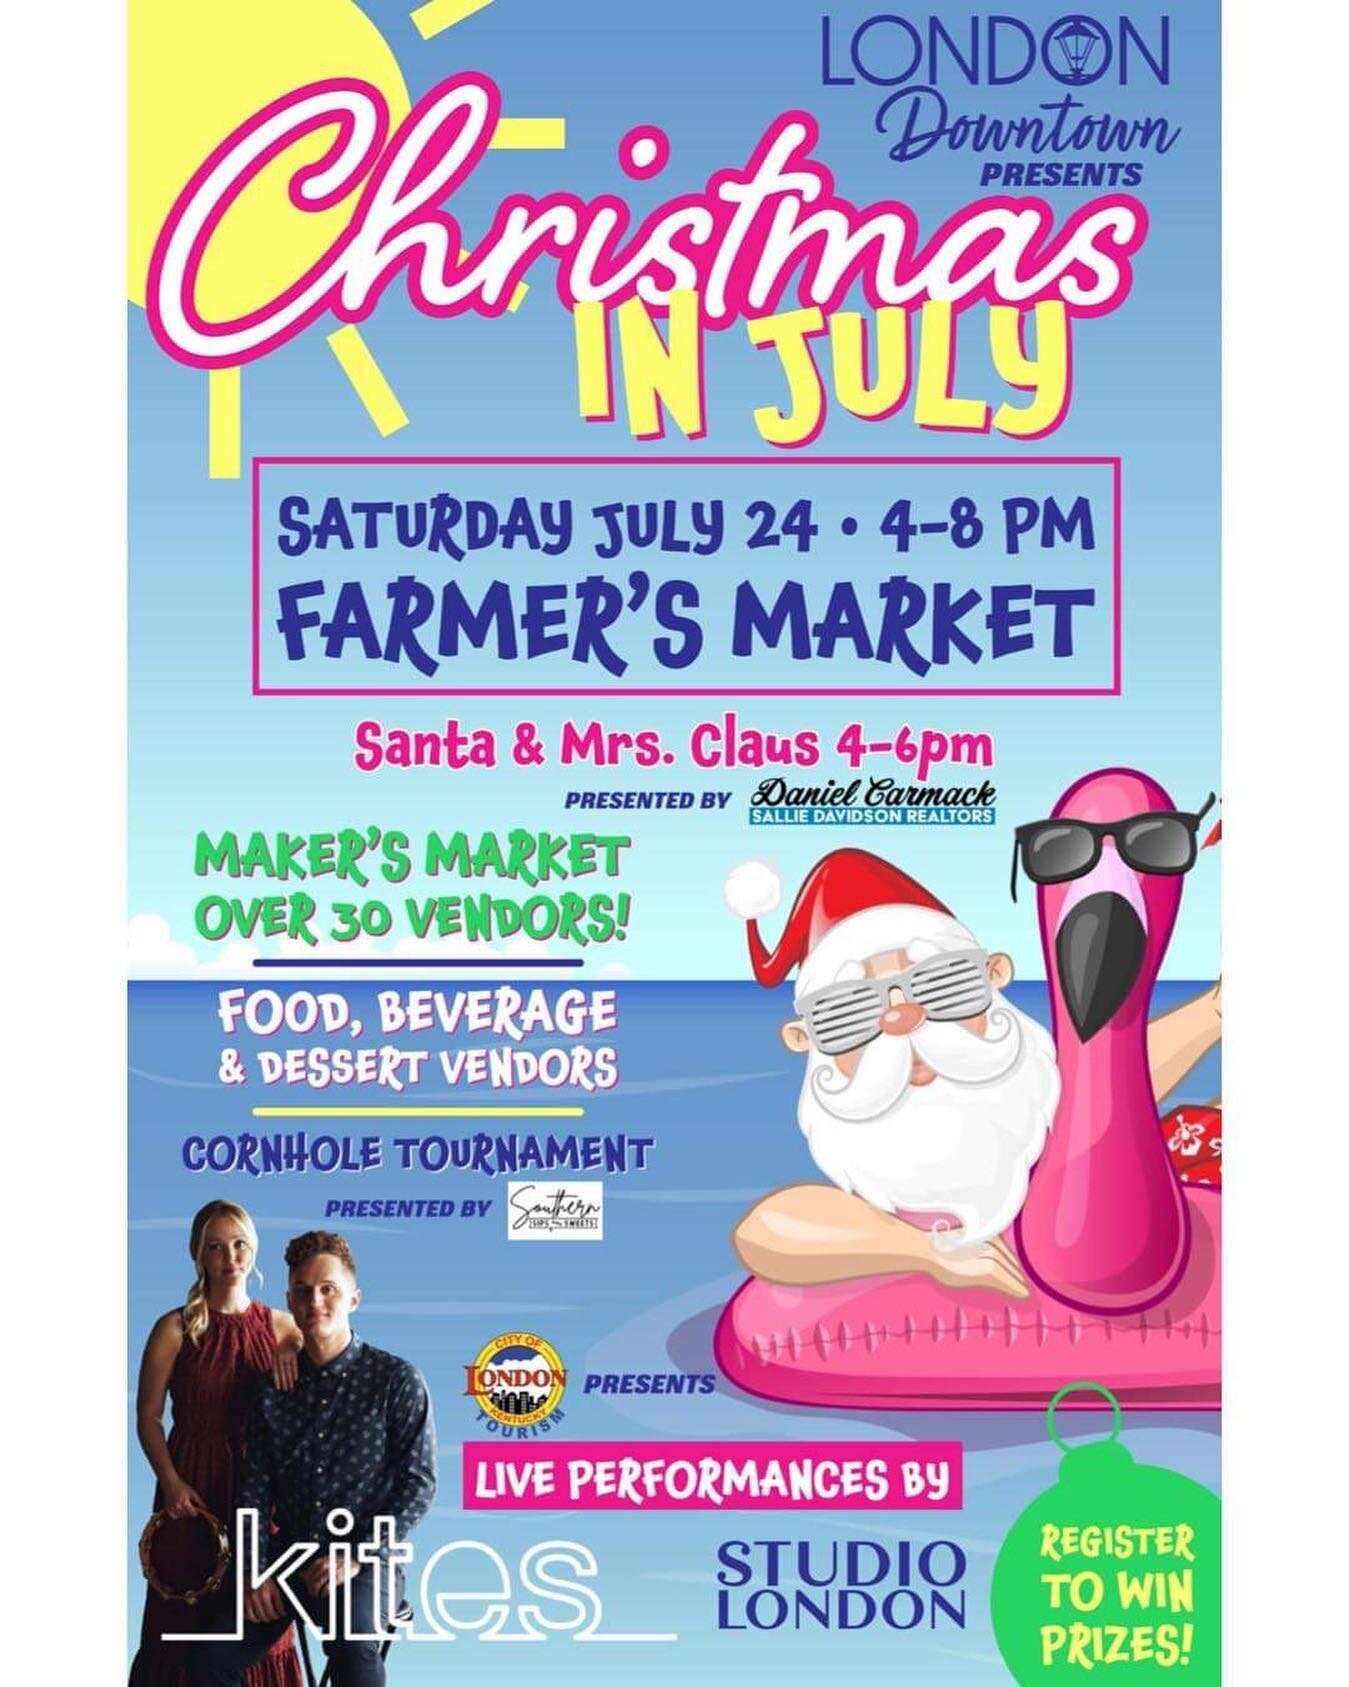 Who is ready to celebrate Christmas in July tomorrow?! The event is taking place across the street at the Farmers Market, but we will have assorted Christmas treats and decor over here from 10-6! I even heard that Santa and Mrs. Claus will be stoppin